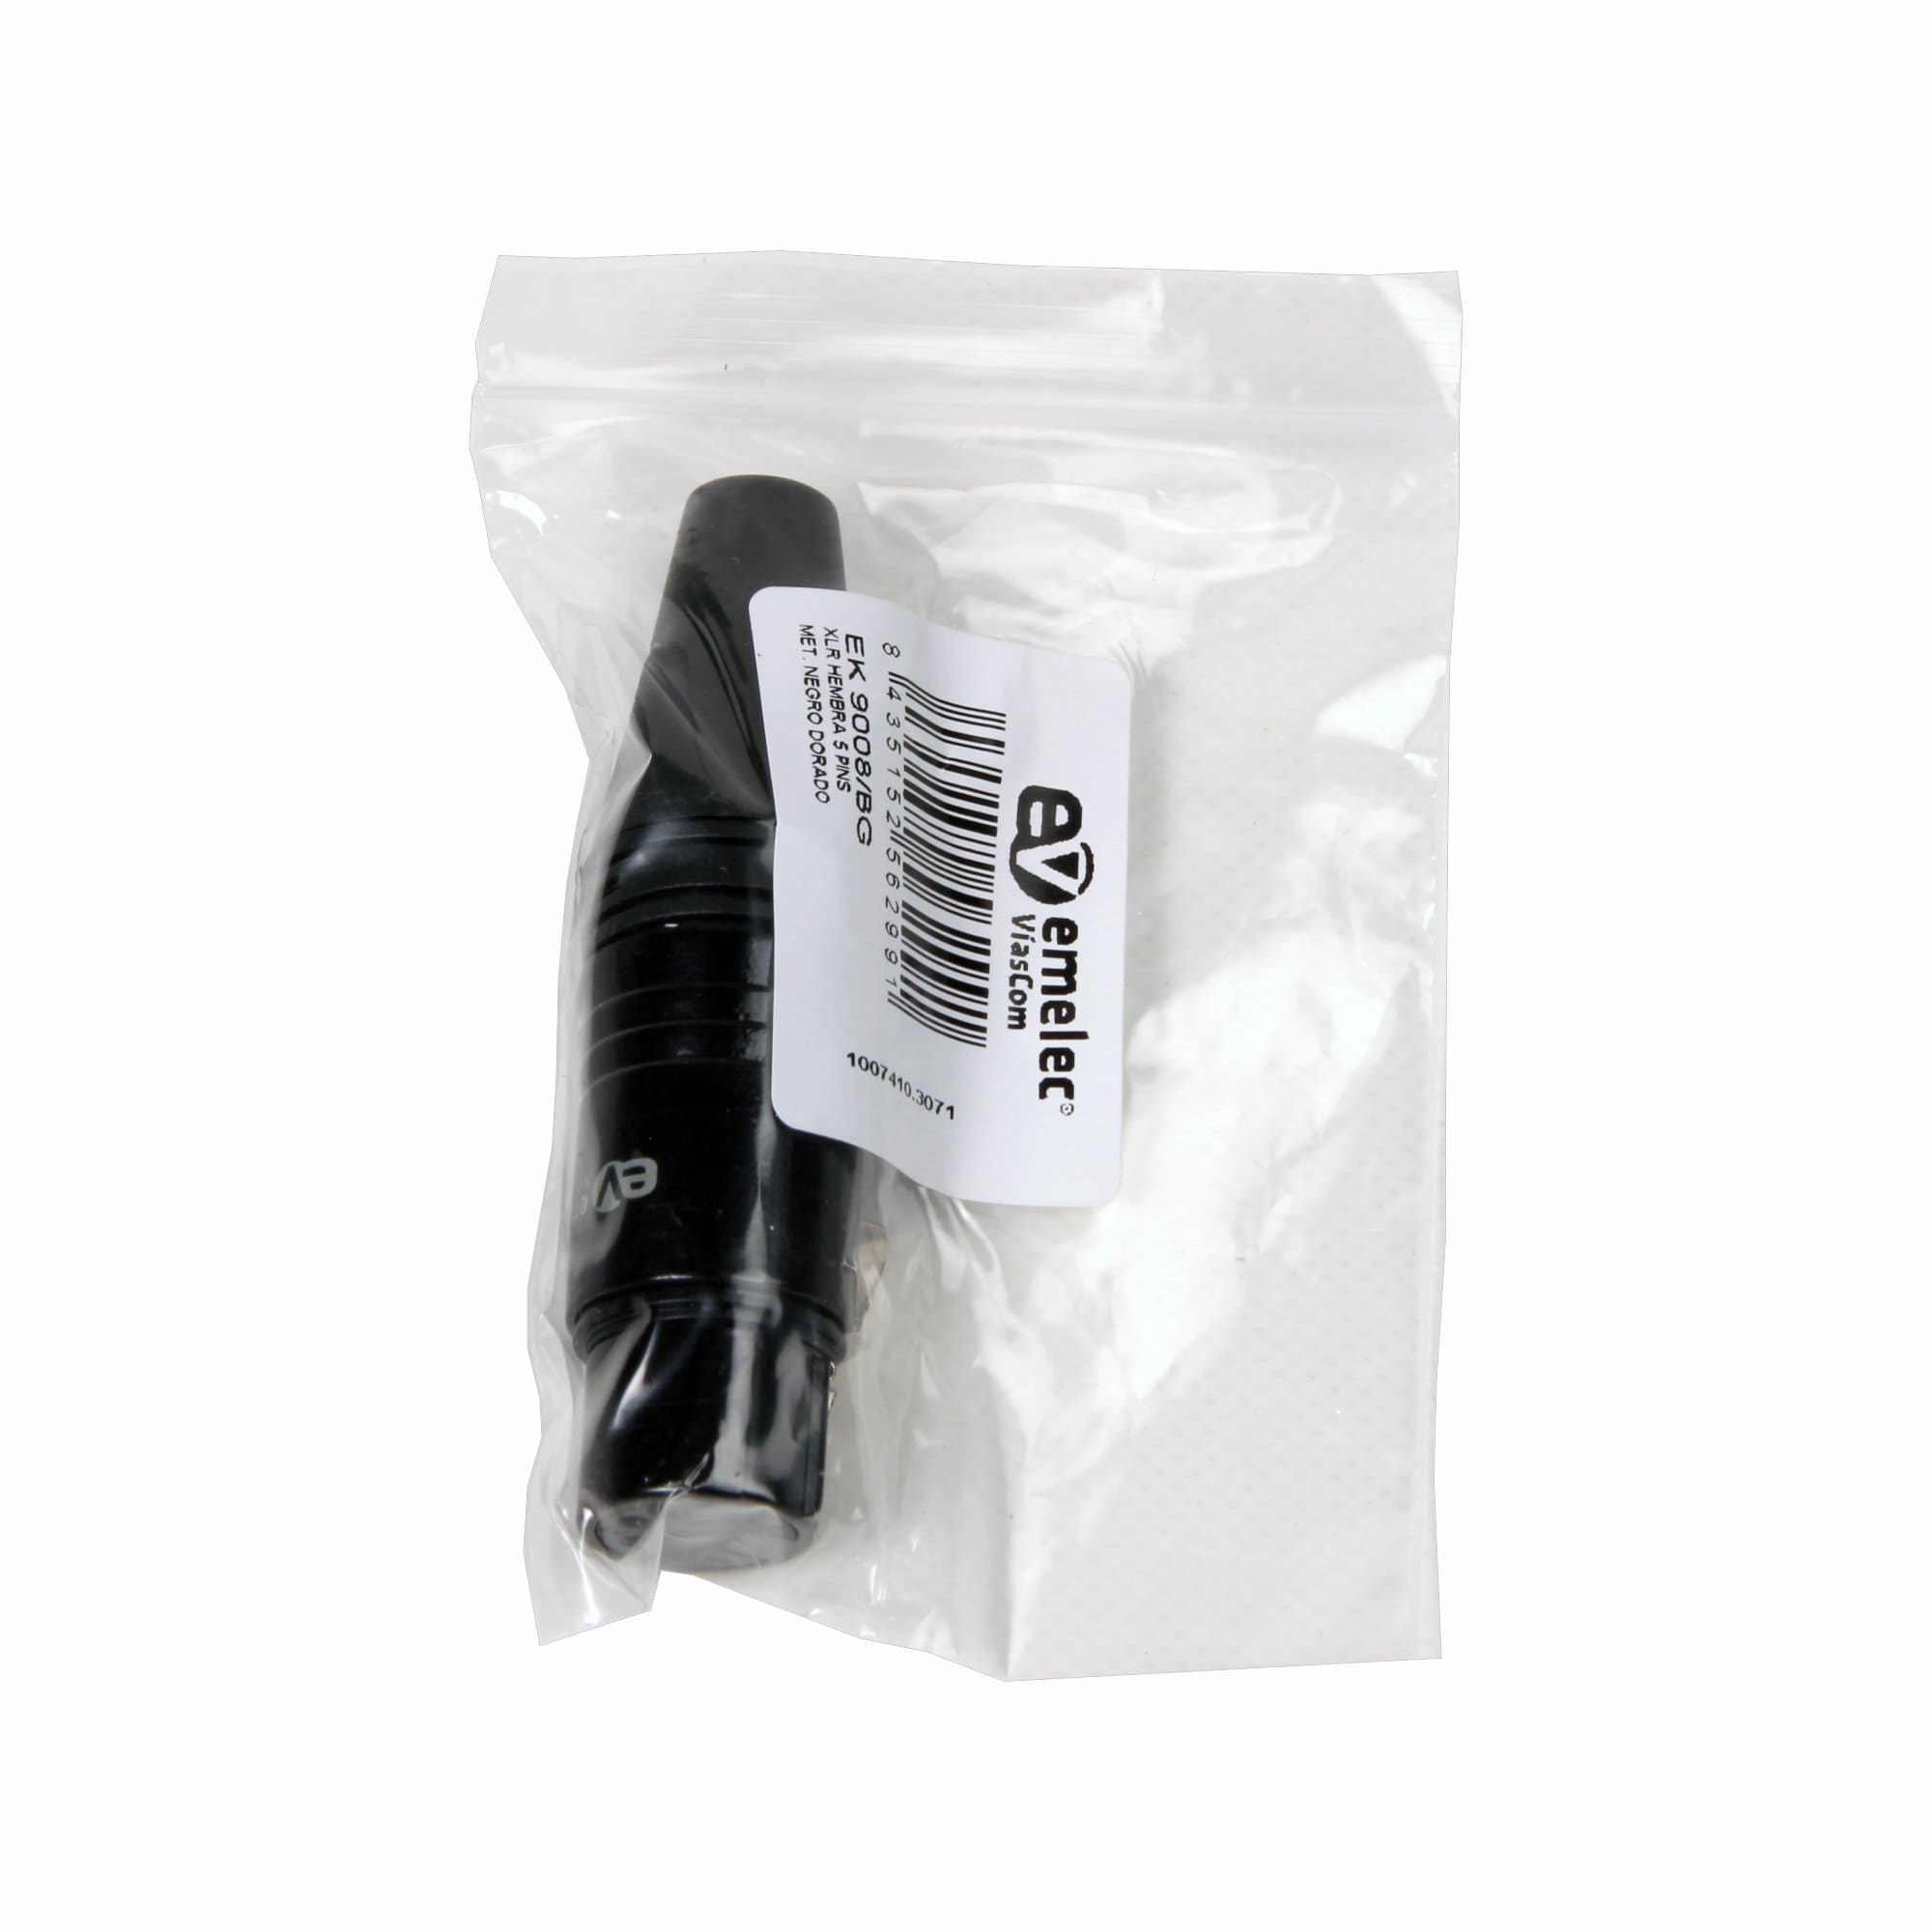 Single plastic bag with black 5-pin female XLR connector from Emelec ViaCom